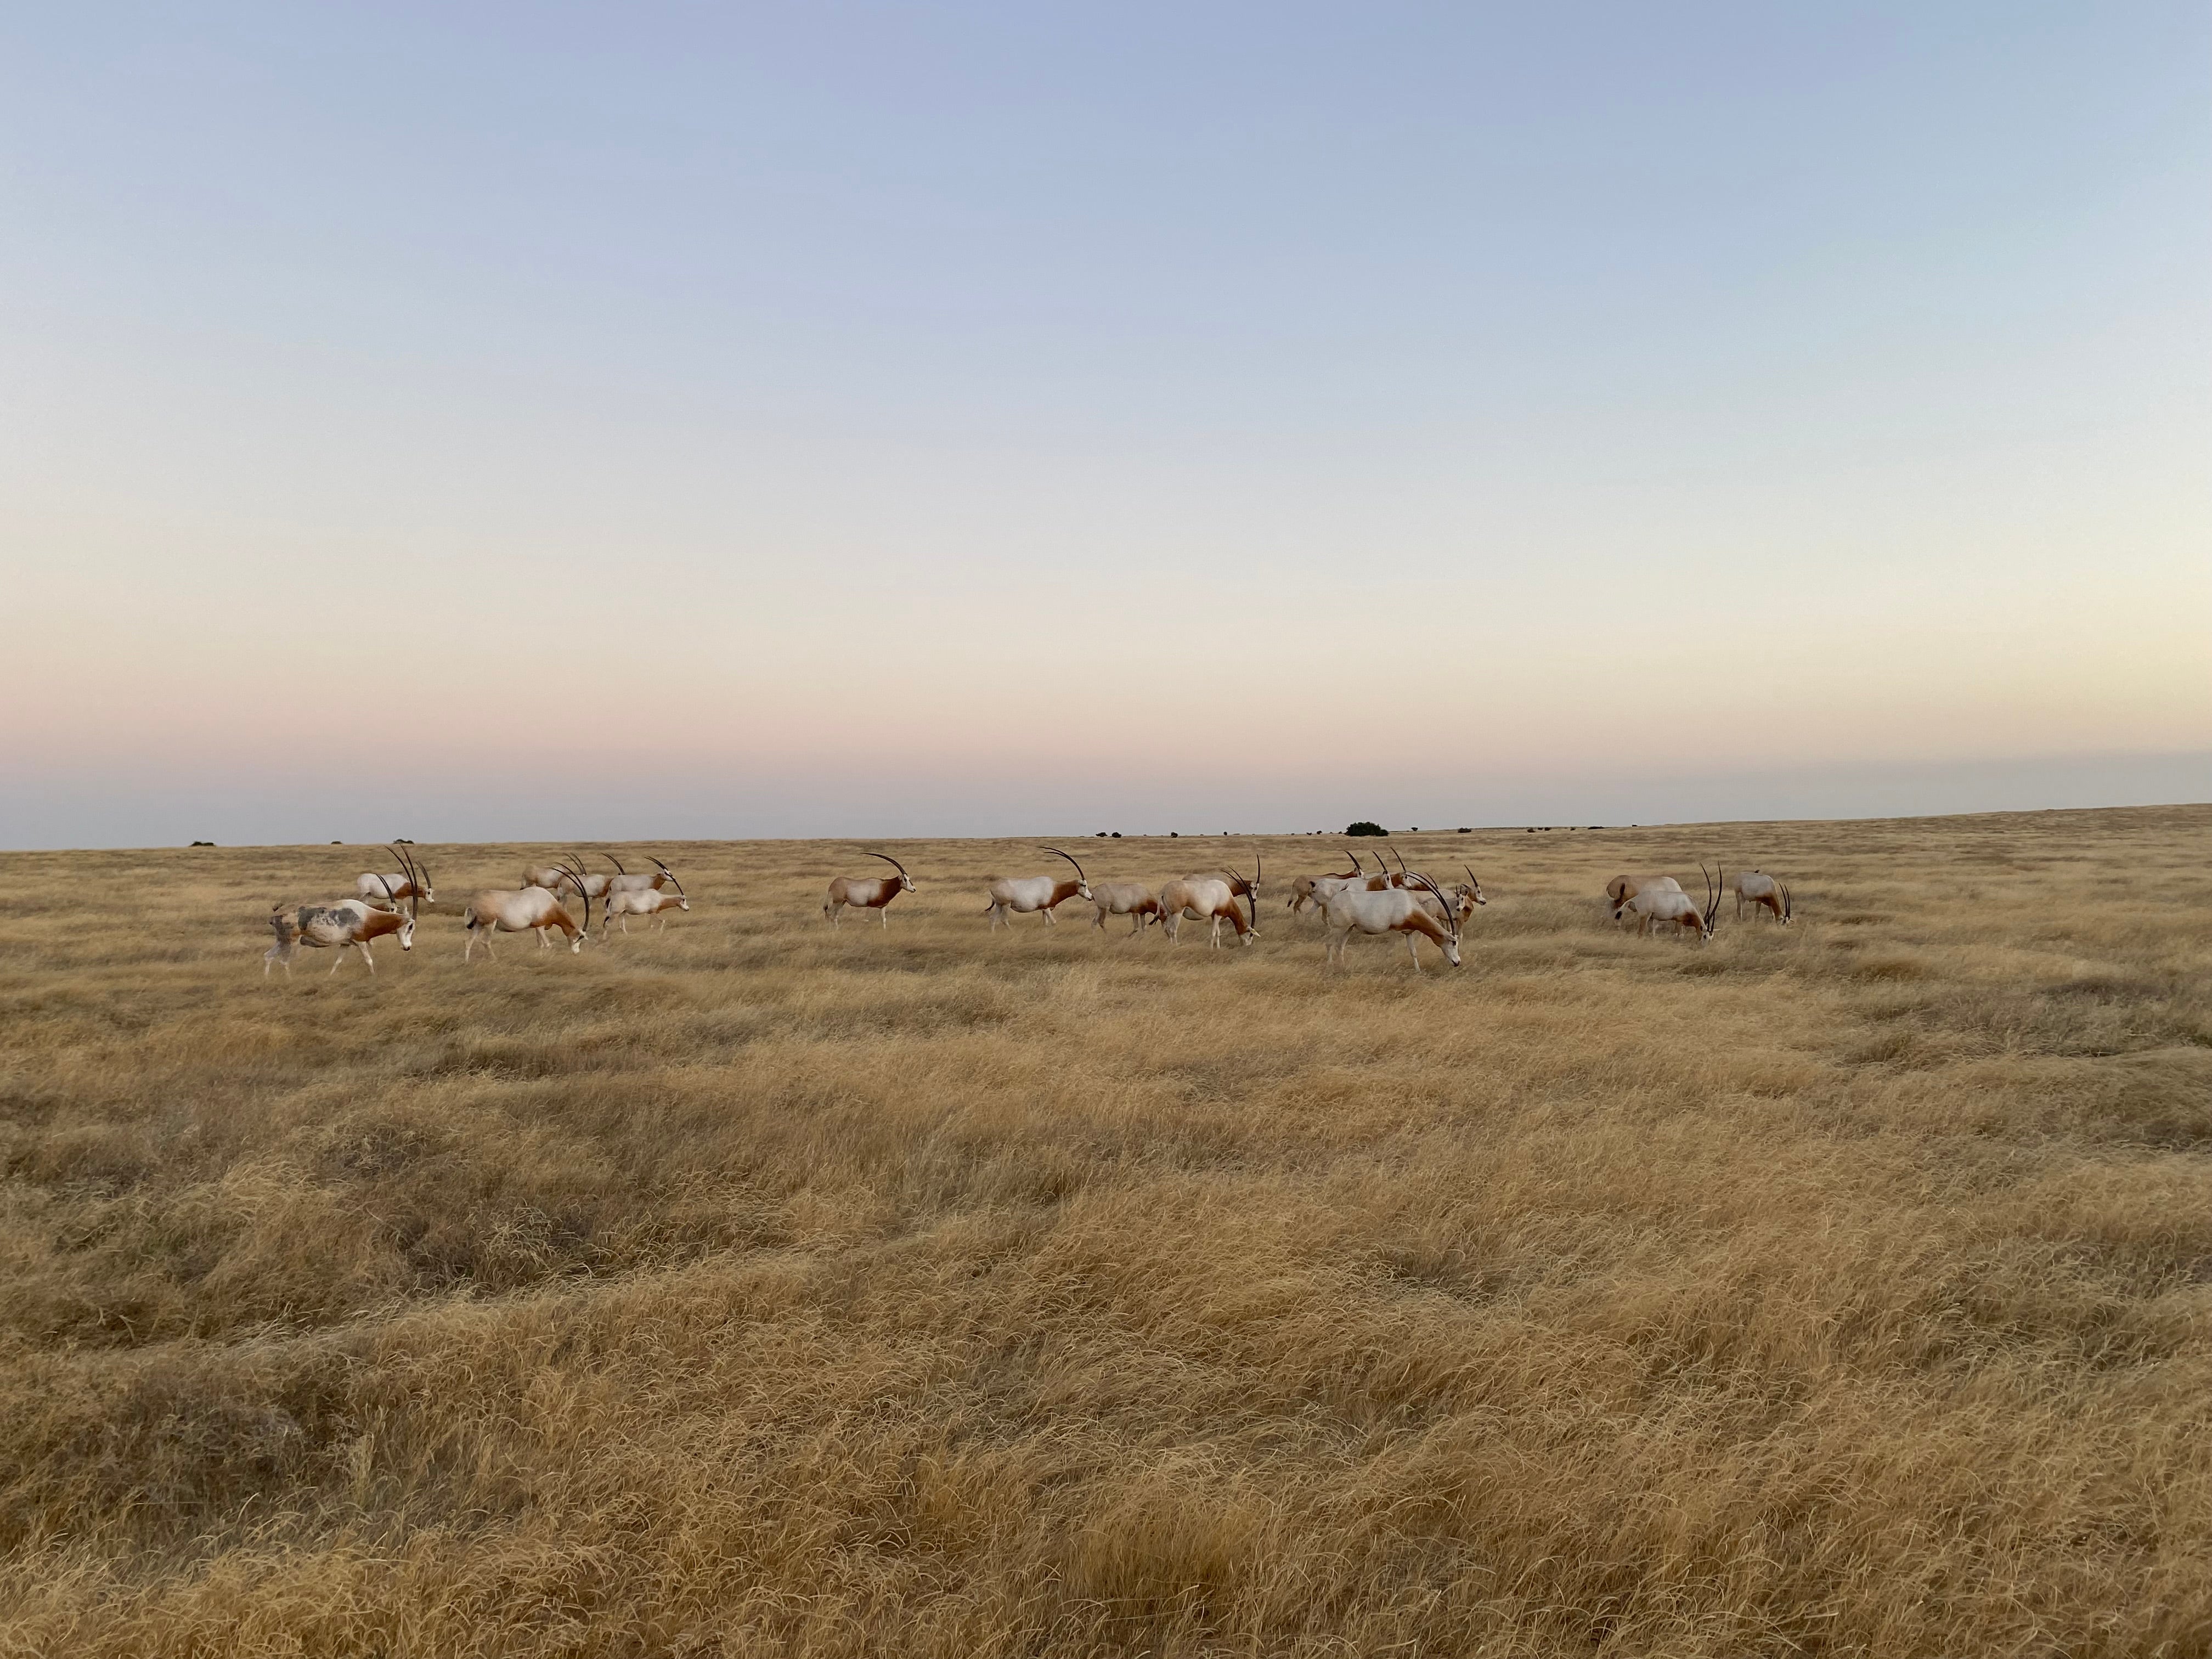 Photo of a herd of scimitar horned oryx on a grassy plain in Chad. The landscape is flat and more than a dozen oryx can be seen.